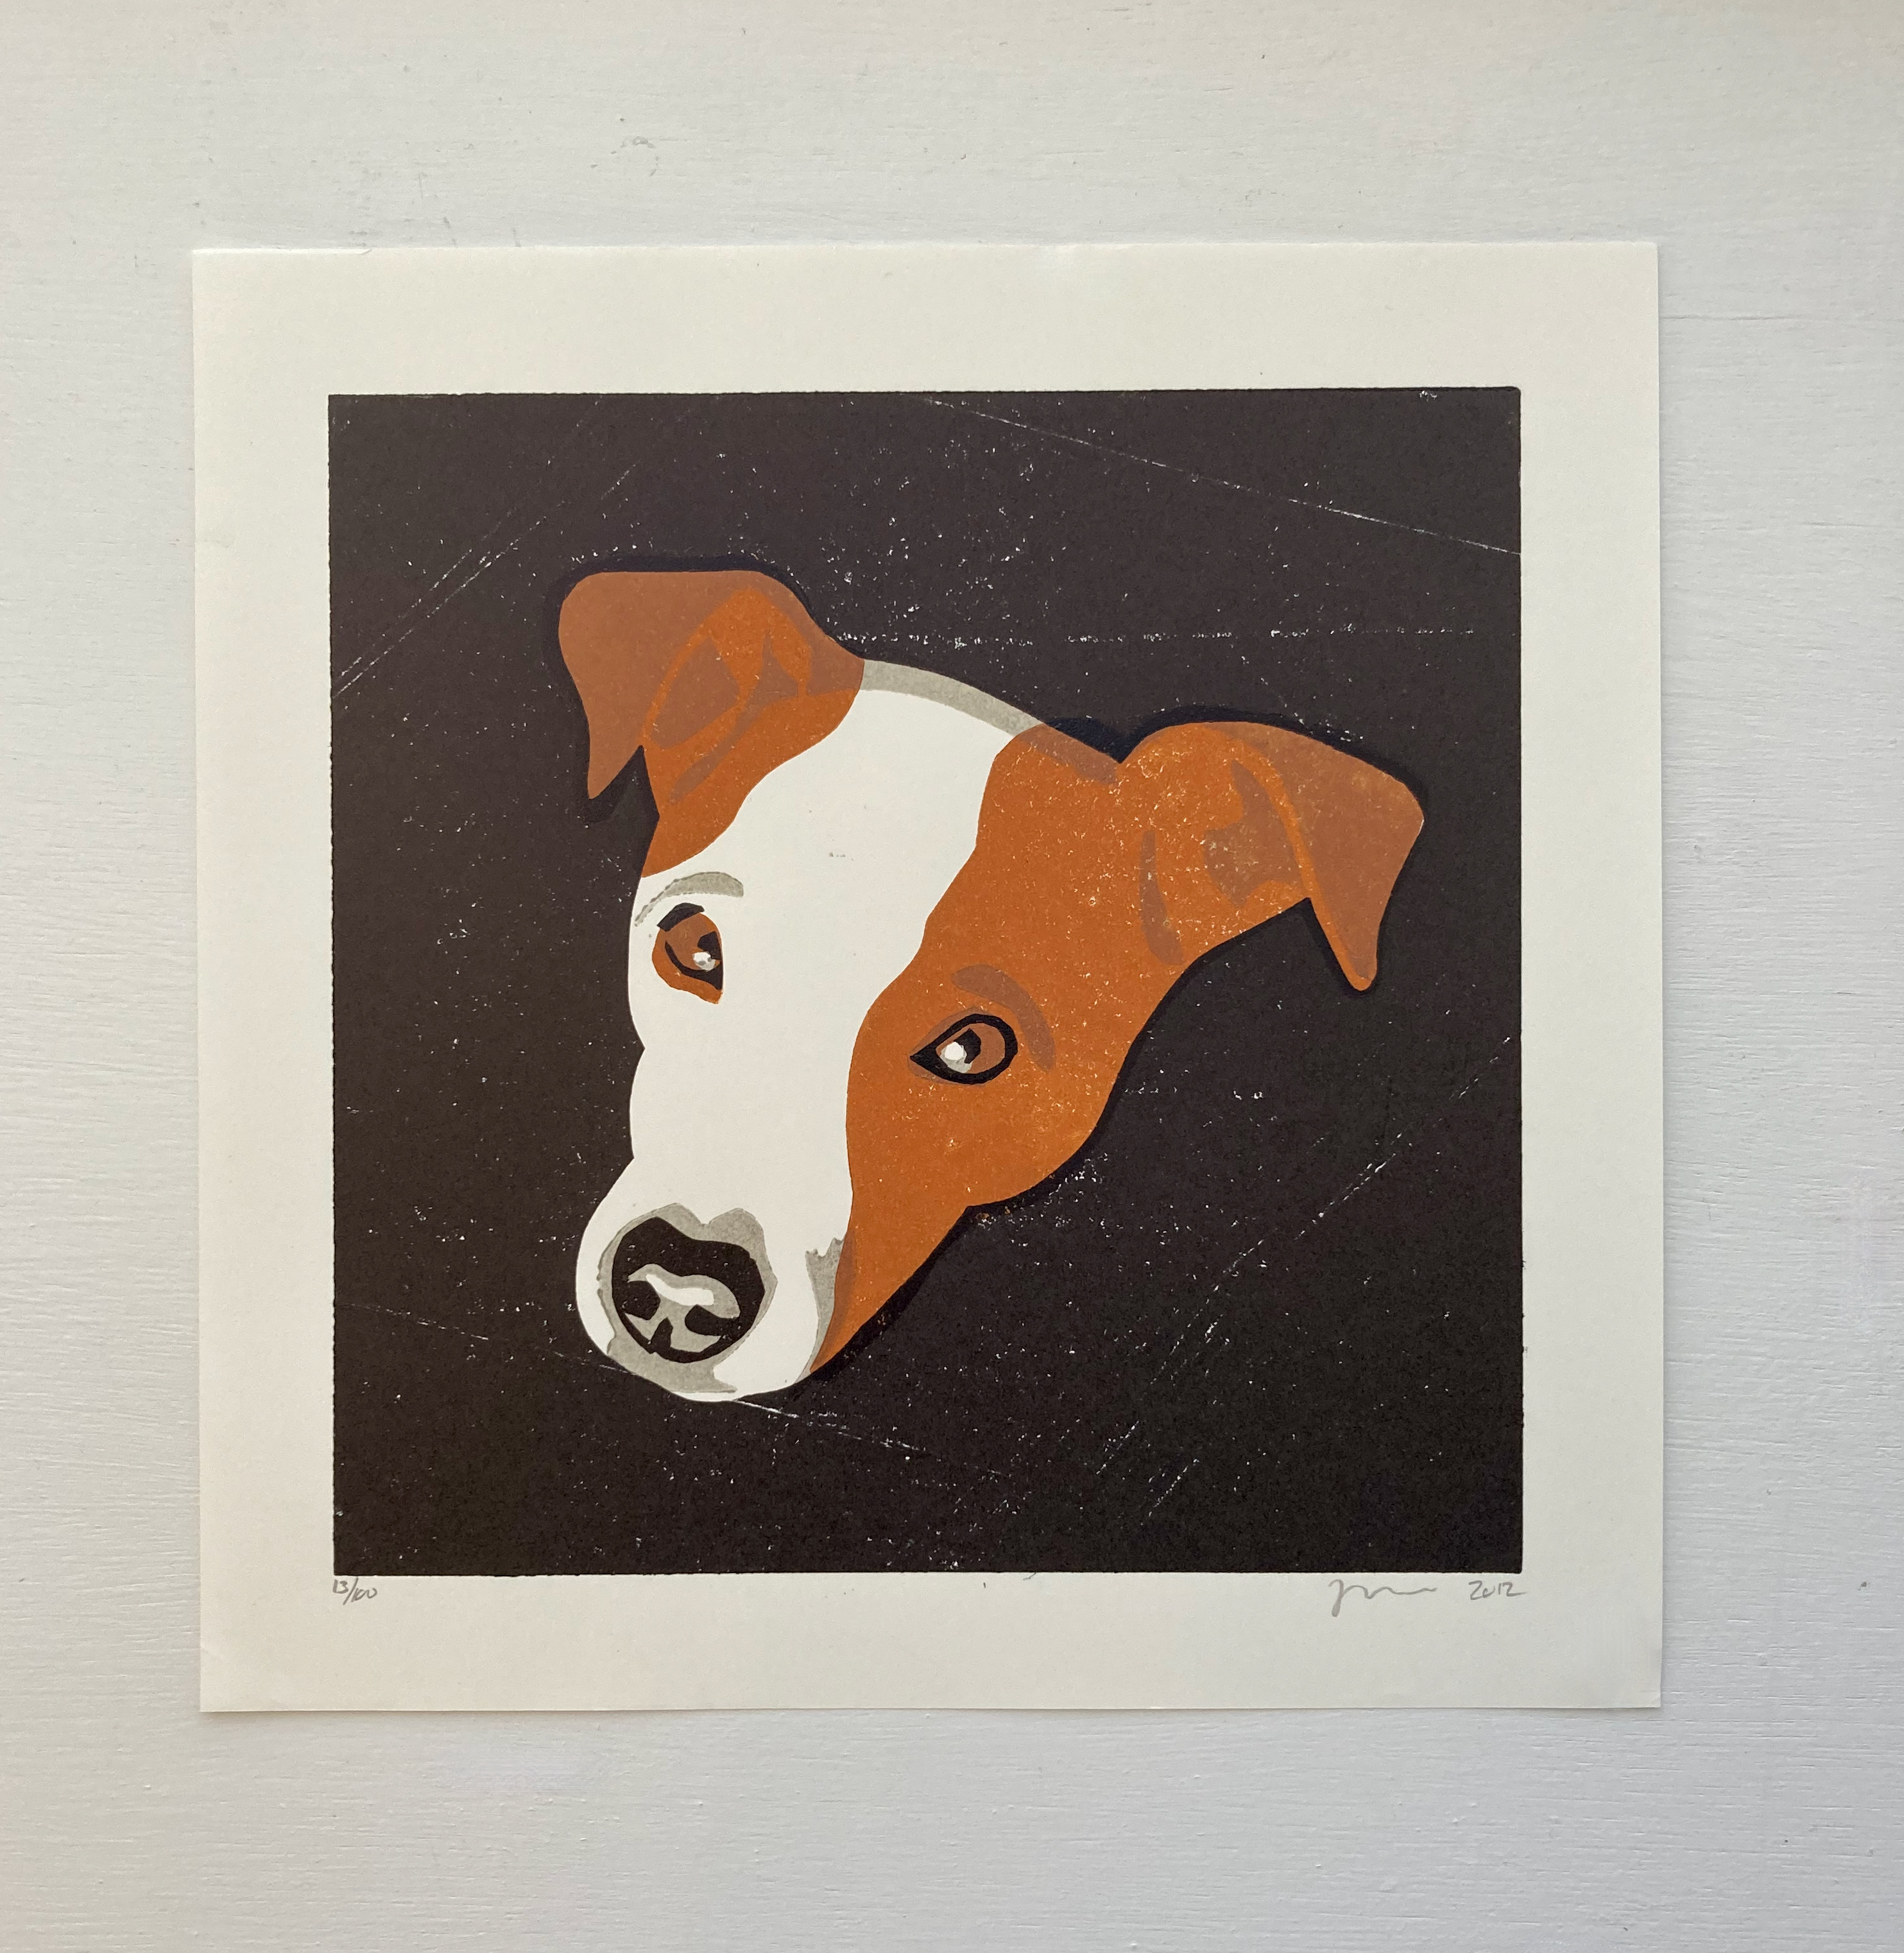 James Brown 'Captain' Jack Russell Dog Print